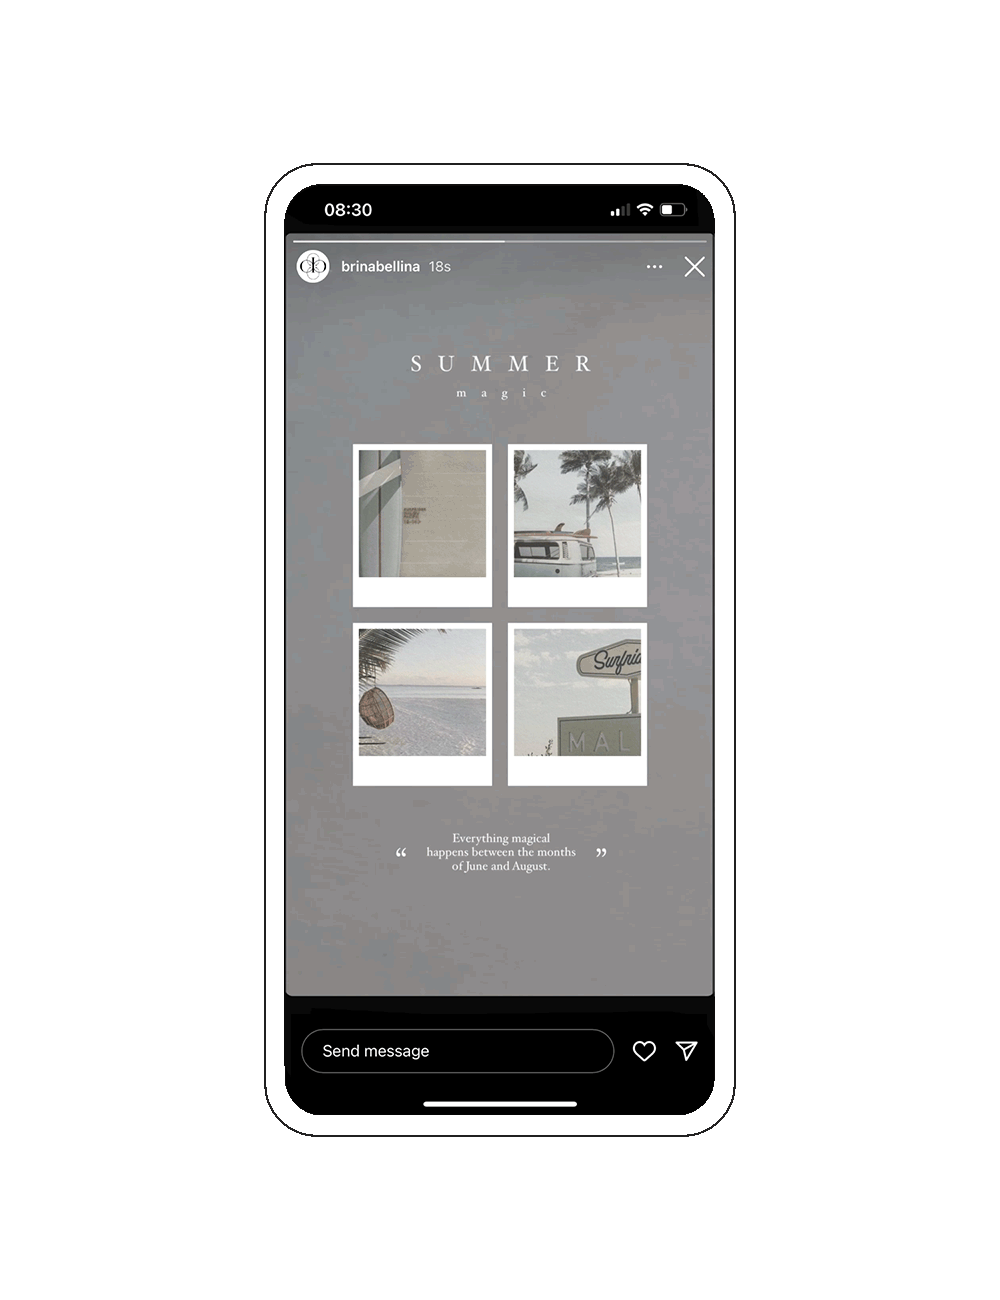 Free Instagram story template in Polaroid design allows you to combine four images and videos in your story.